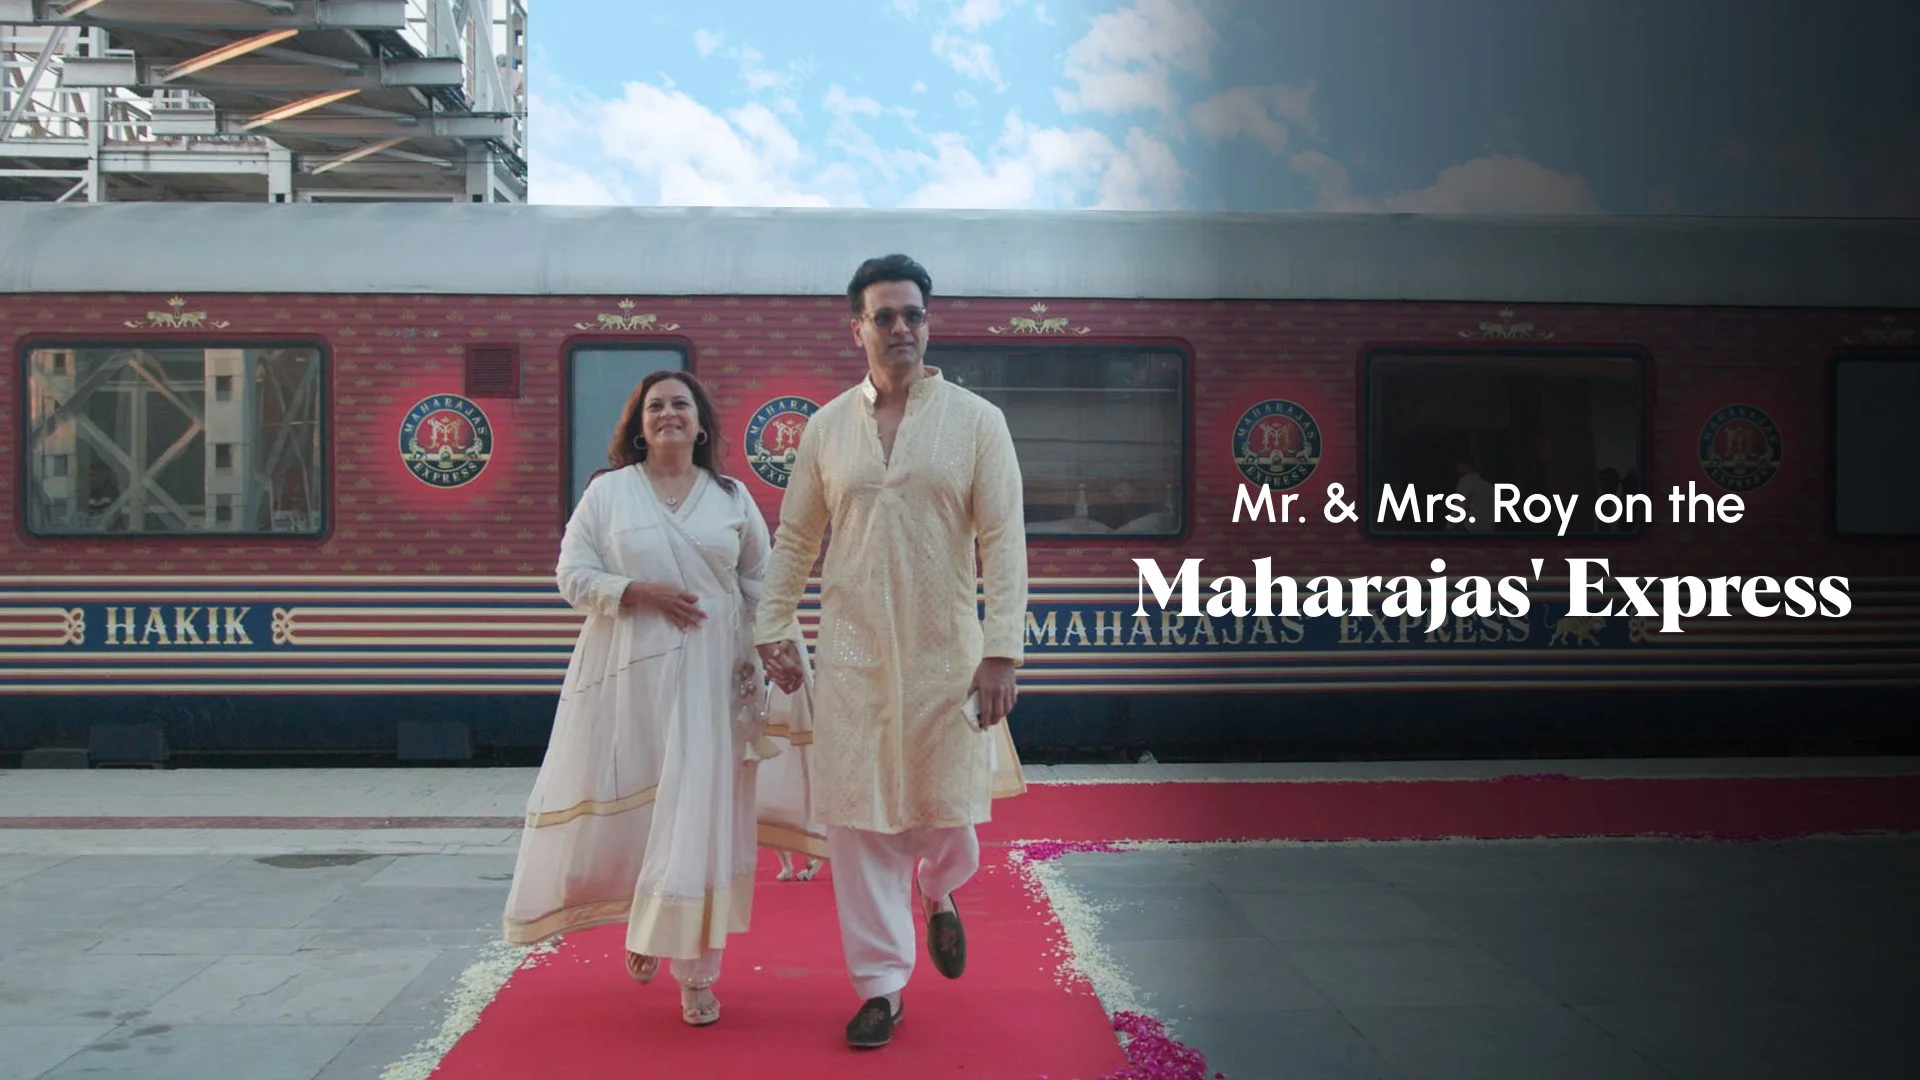 Mr. & Mrs. Roy On The Maharajas' Express